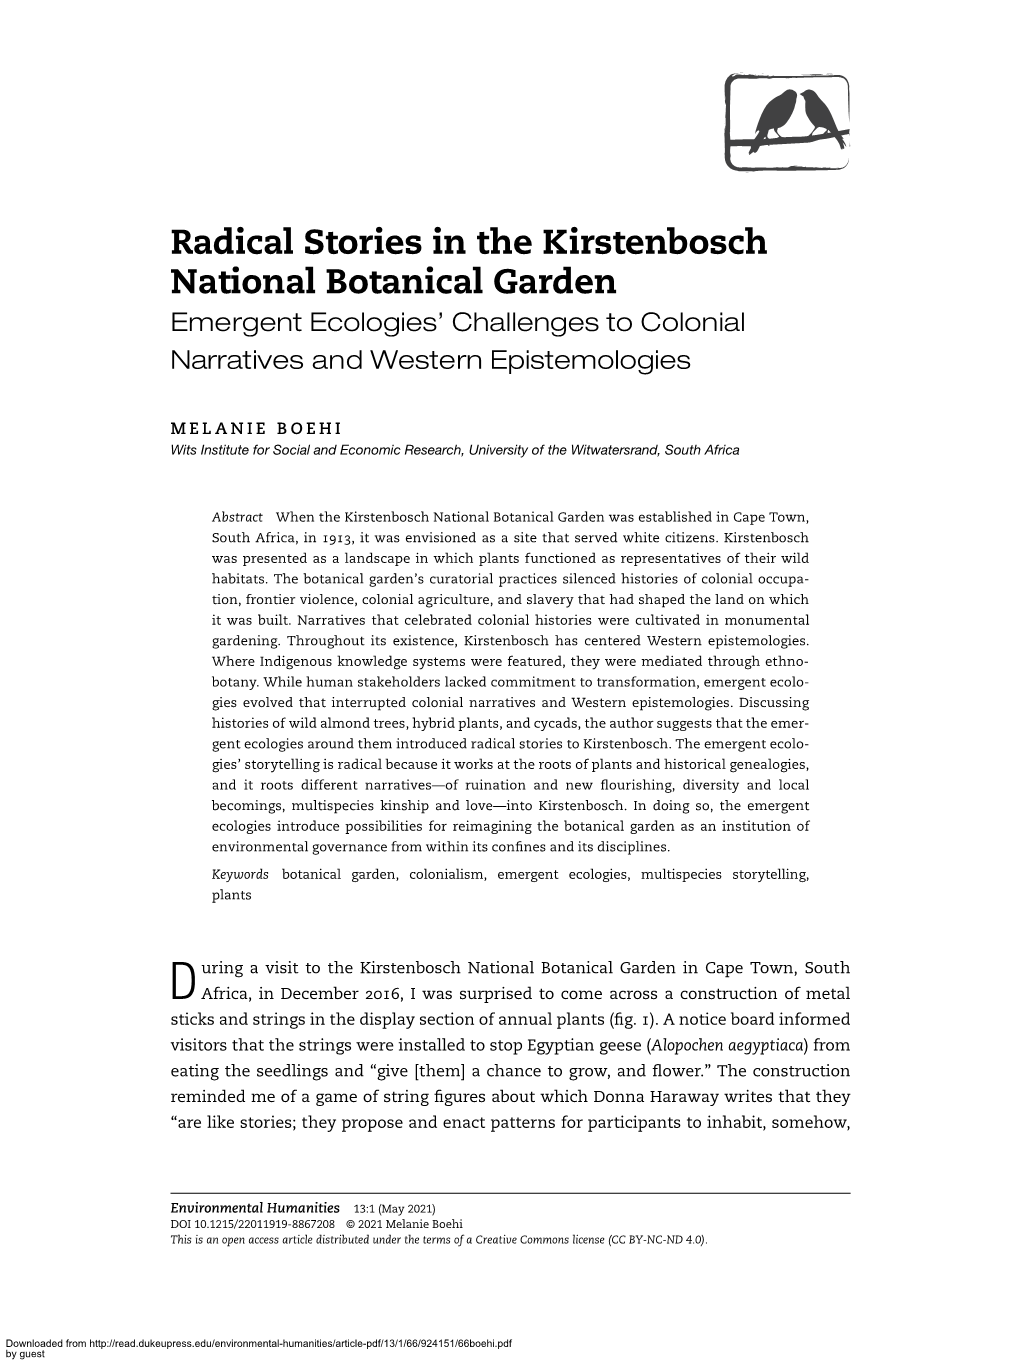 Radical Stories in the Kirstenbosch National Botanical Garden Emergent Ecologies’ Challenges to Colonial Narratives and Western Epistemologies